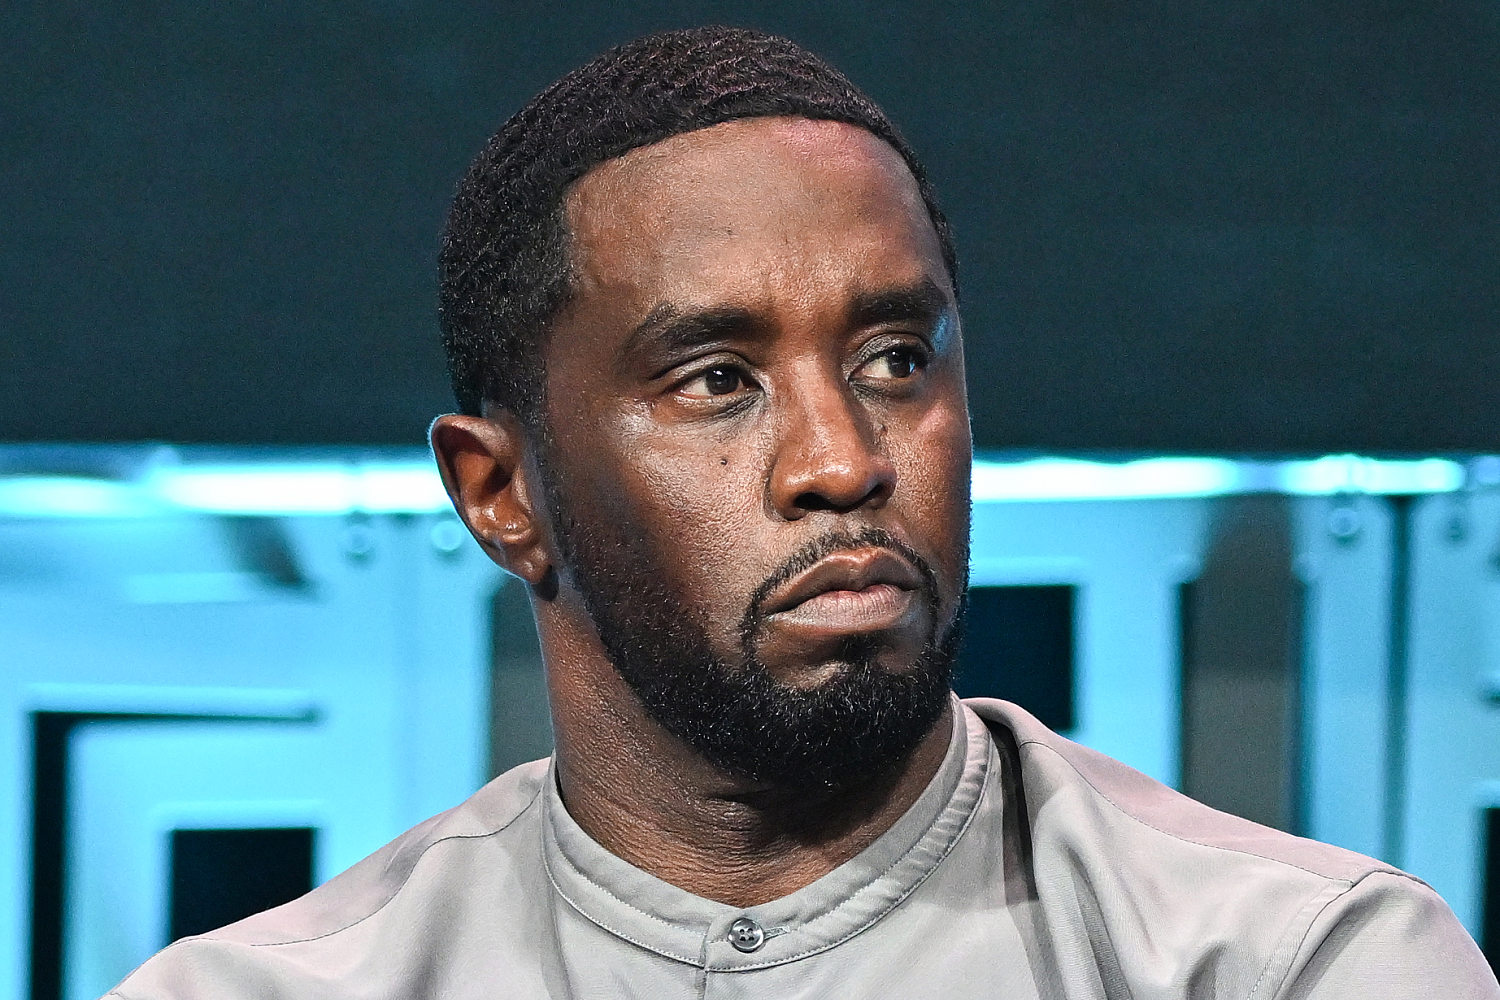 Sean 'Diddy' Combs 'truly sorry' for behavior in video that appears to show him beating ex-girlfriend